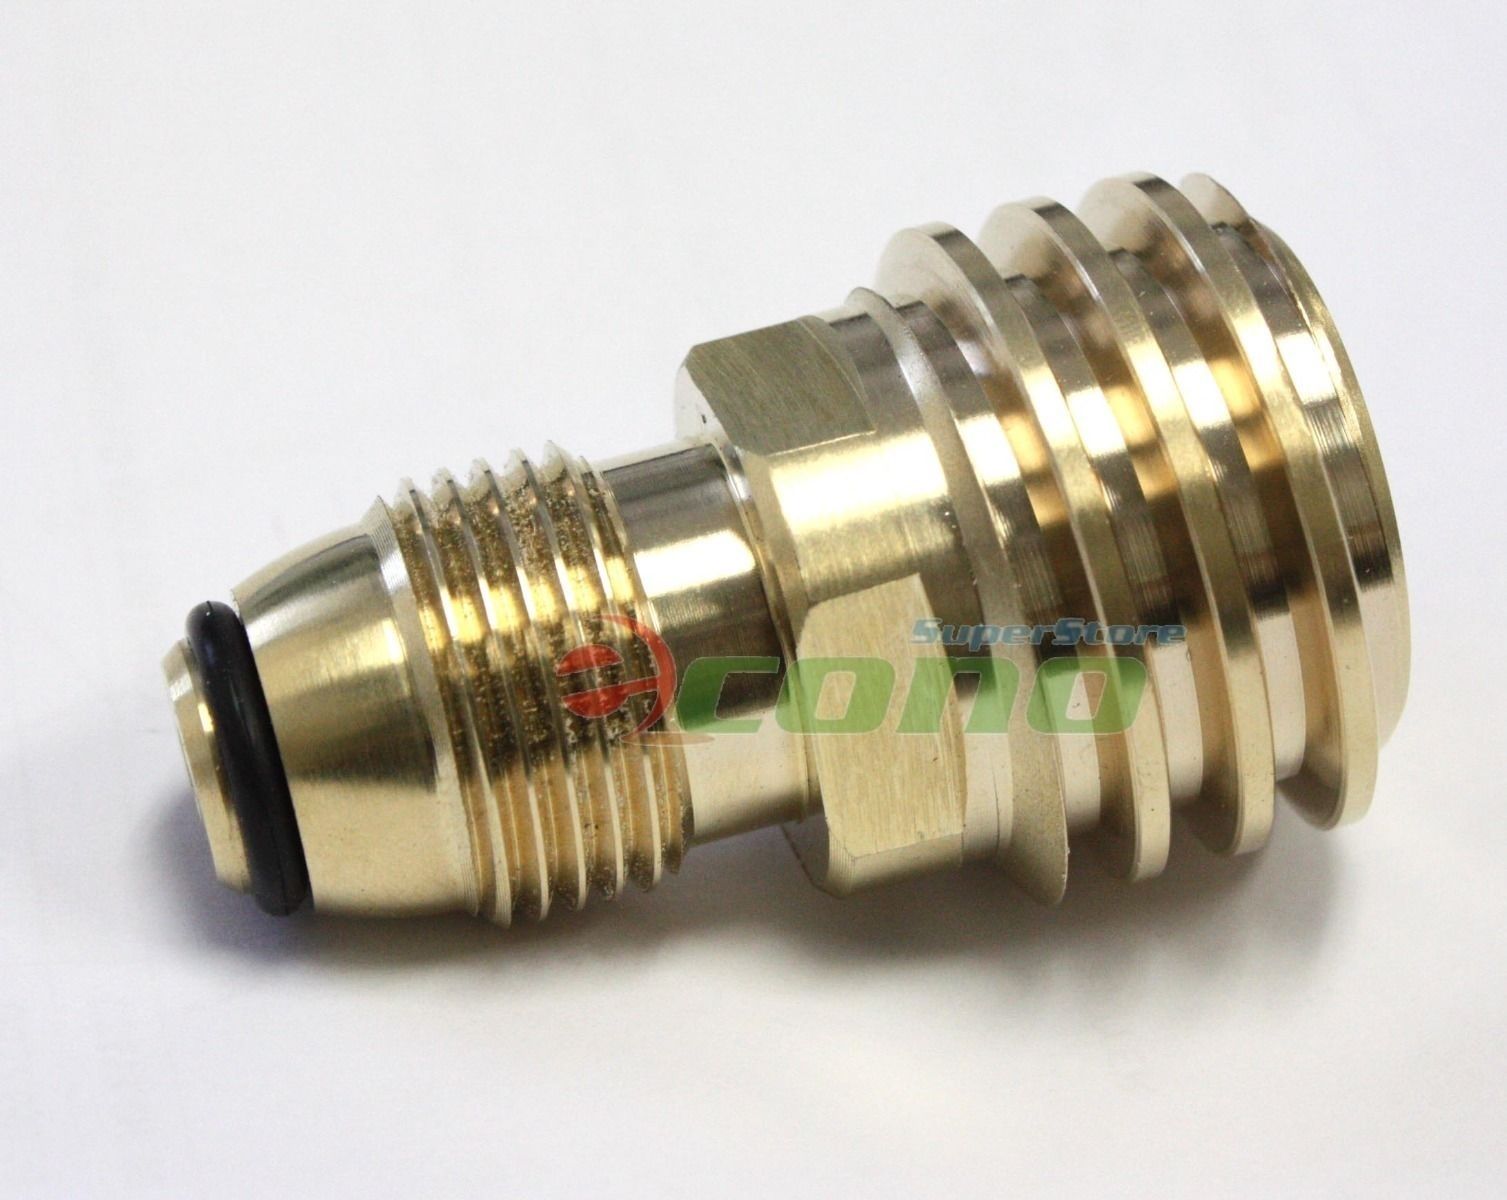 Converts Propane LP TANK POL service valve to QCC Outlet Brass Adapter CYN 